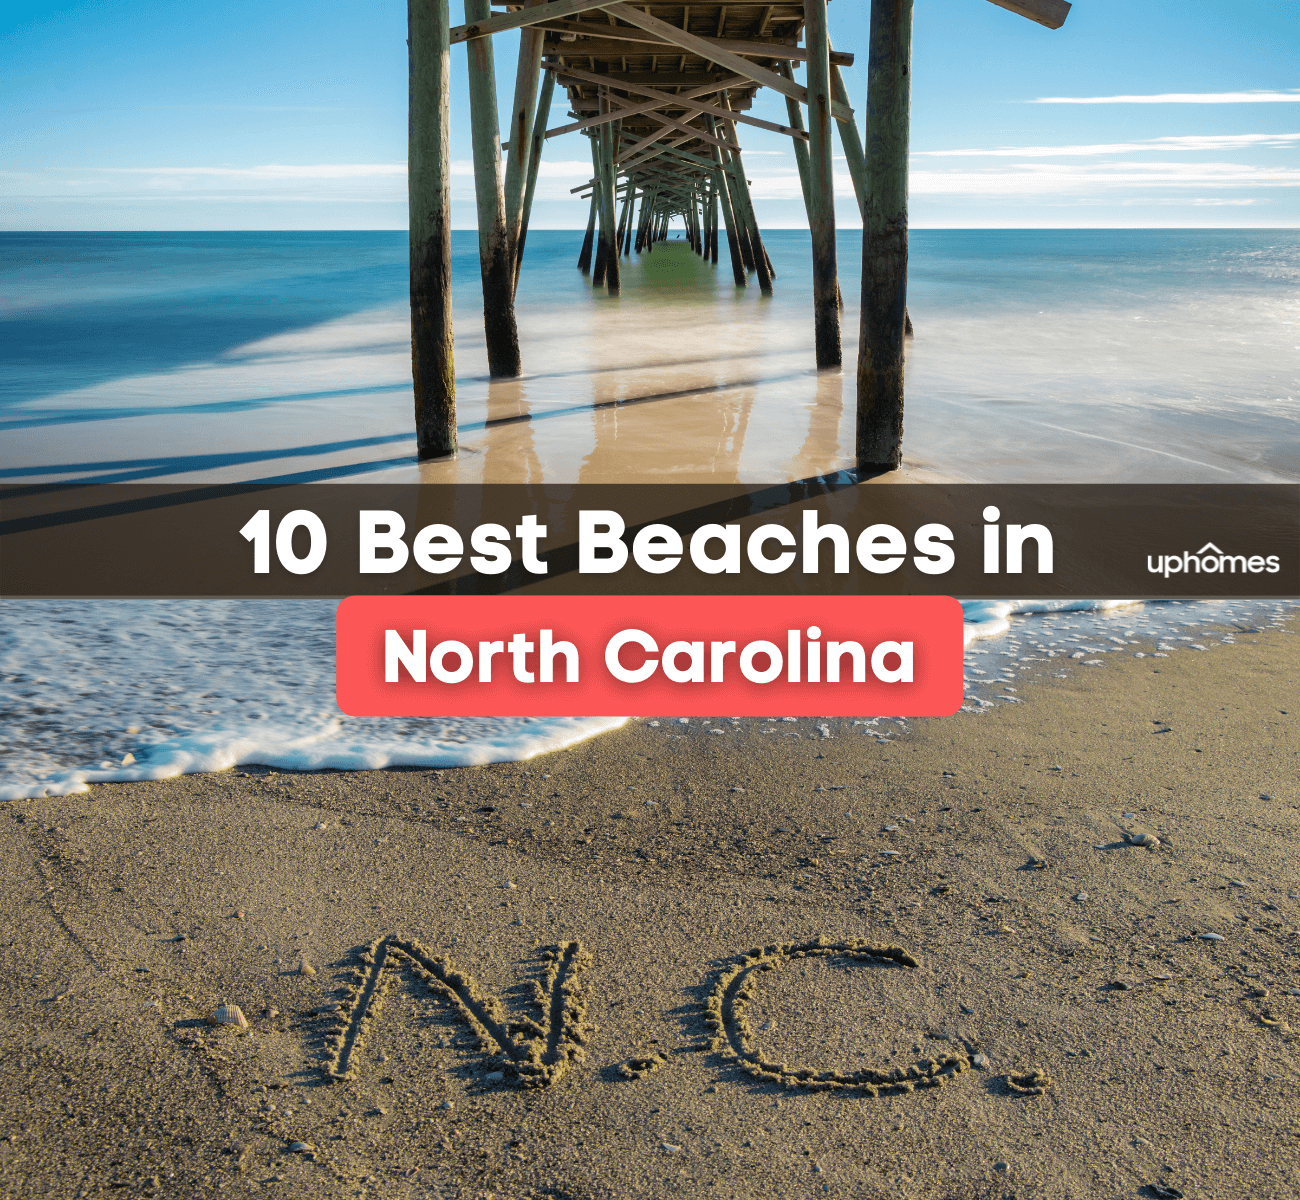 10 best beaches in north carolina - what are the best beaches in NC to visit with family, friends, for fun in the sand!